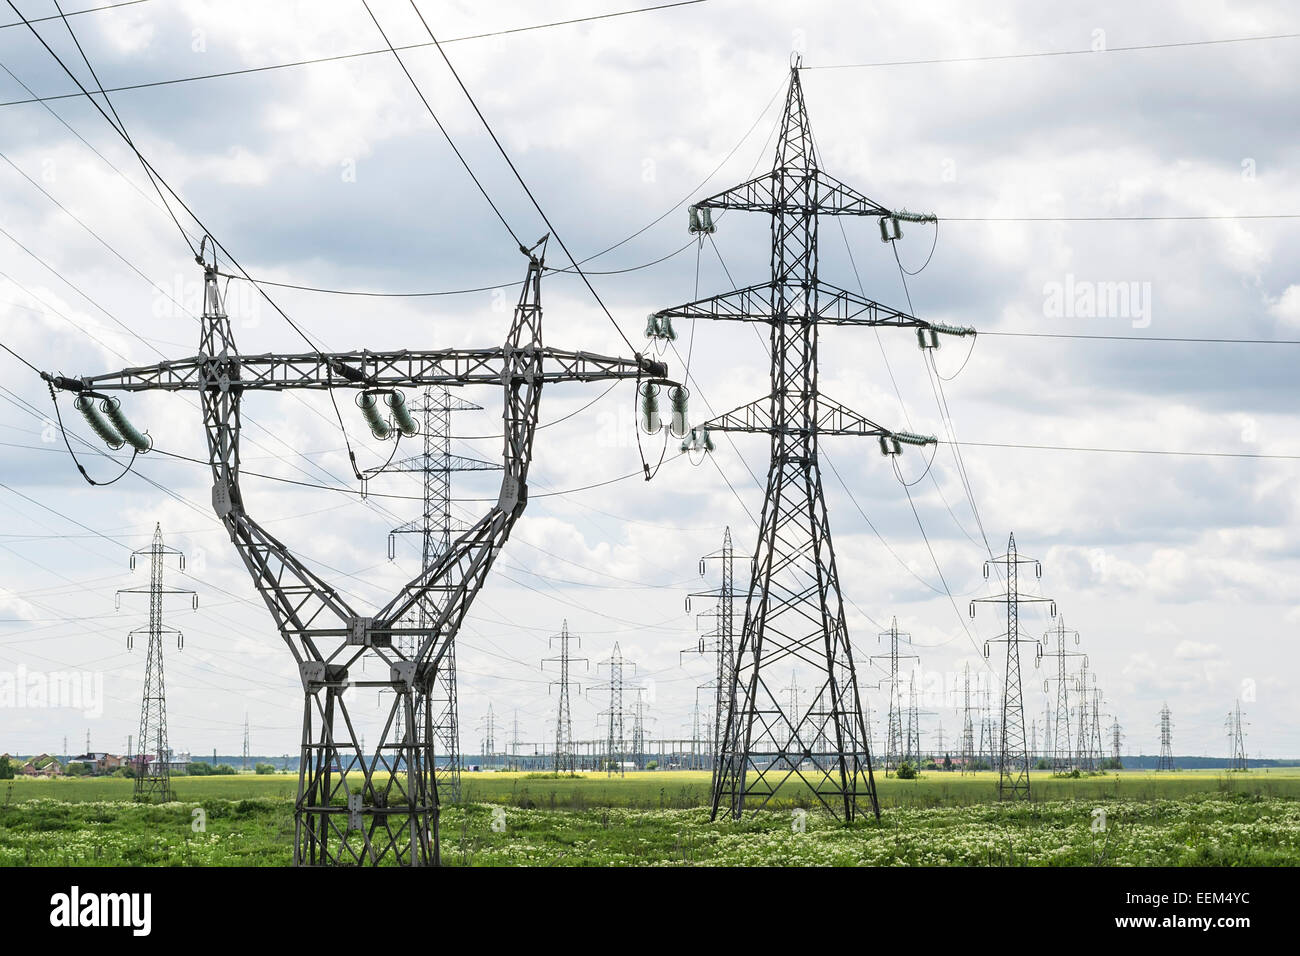 Two types of electrical power lines towers withing a large network for energy distribution Stock Photo